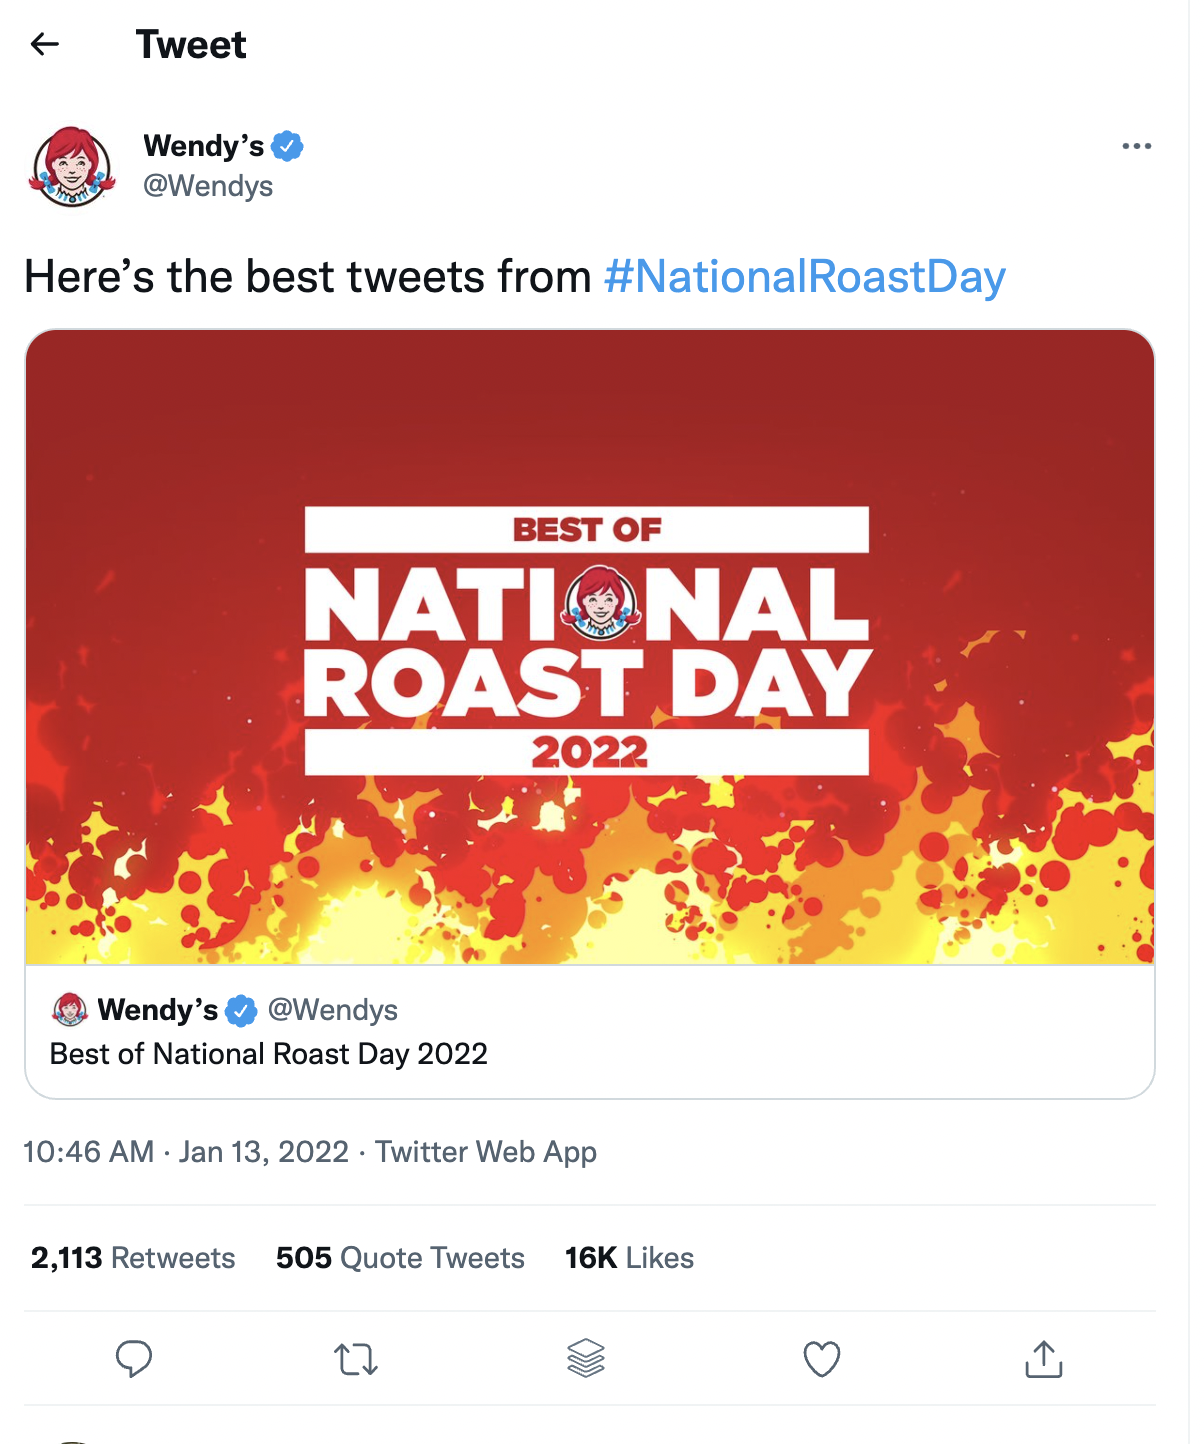 Screenshot of Wendy's Twitter account on National Roast Day